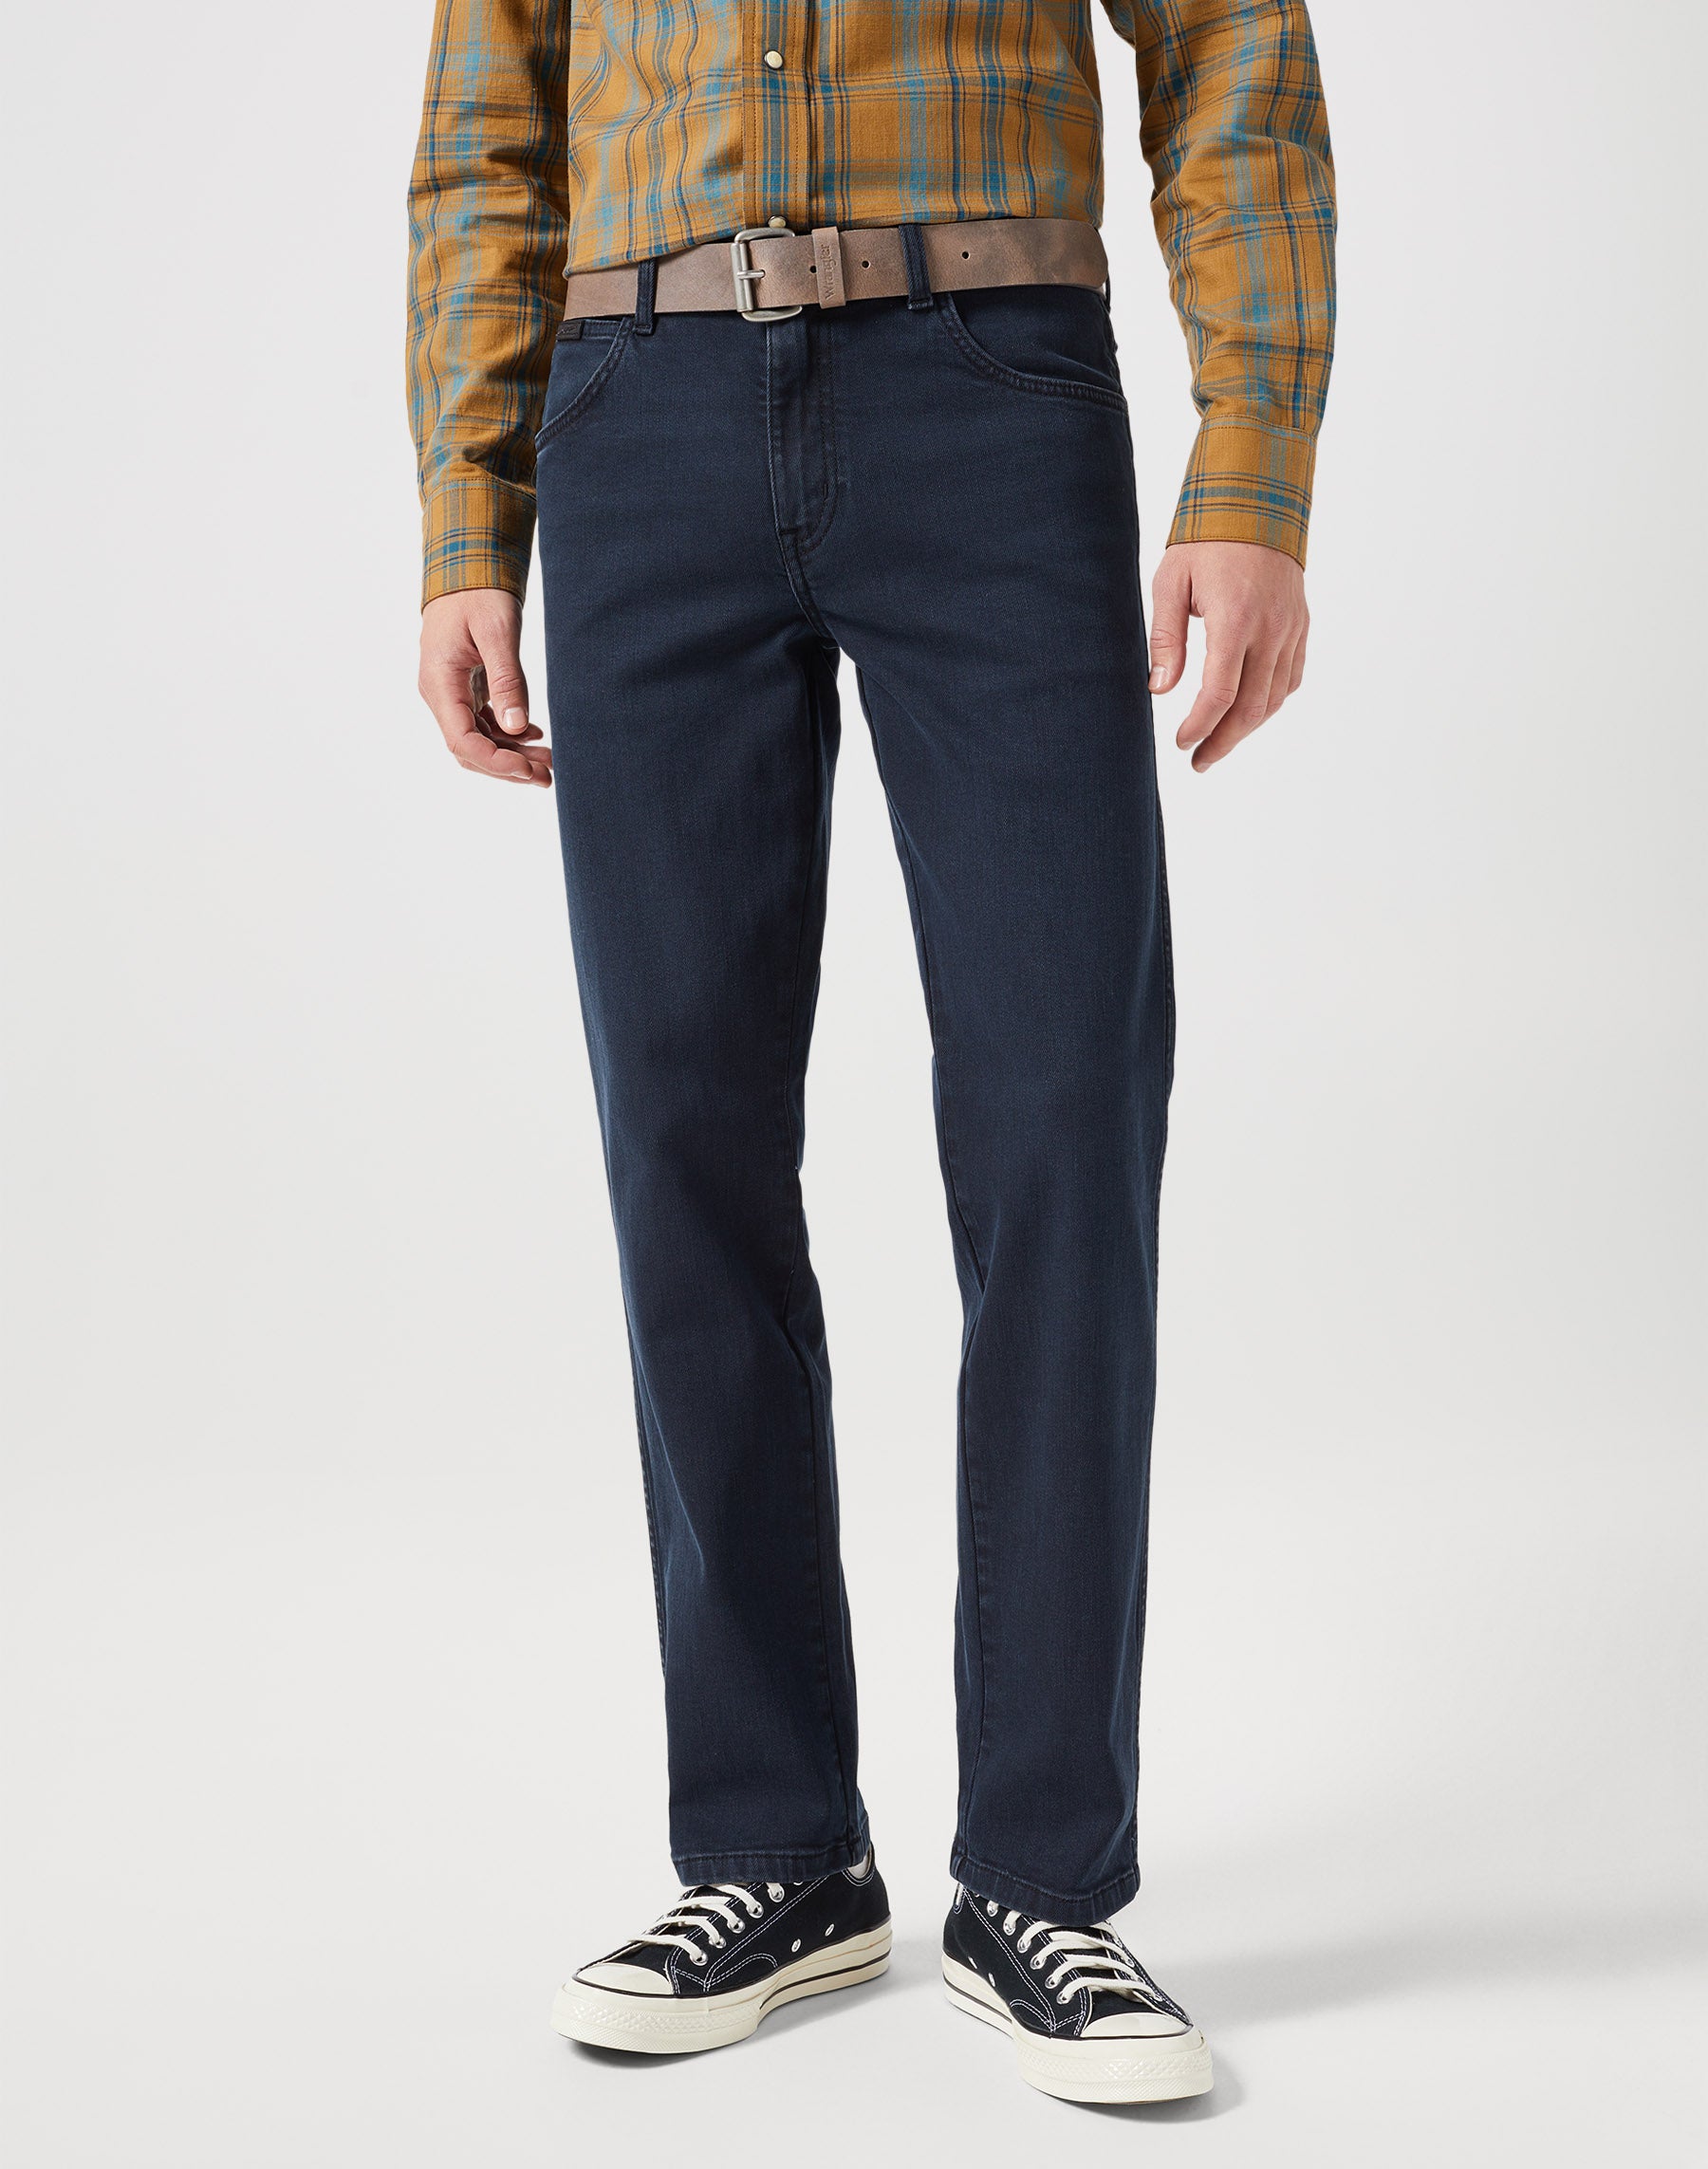 Texas Low Stretch in Cloudy Skies Jeans Wrangler   